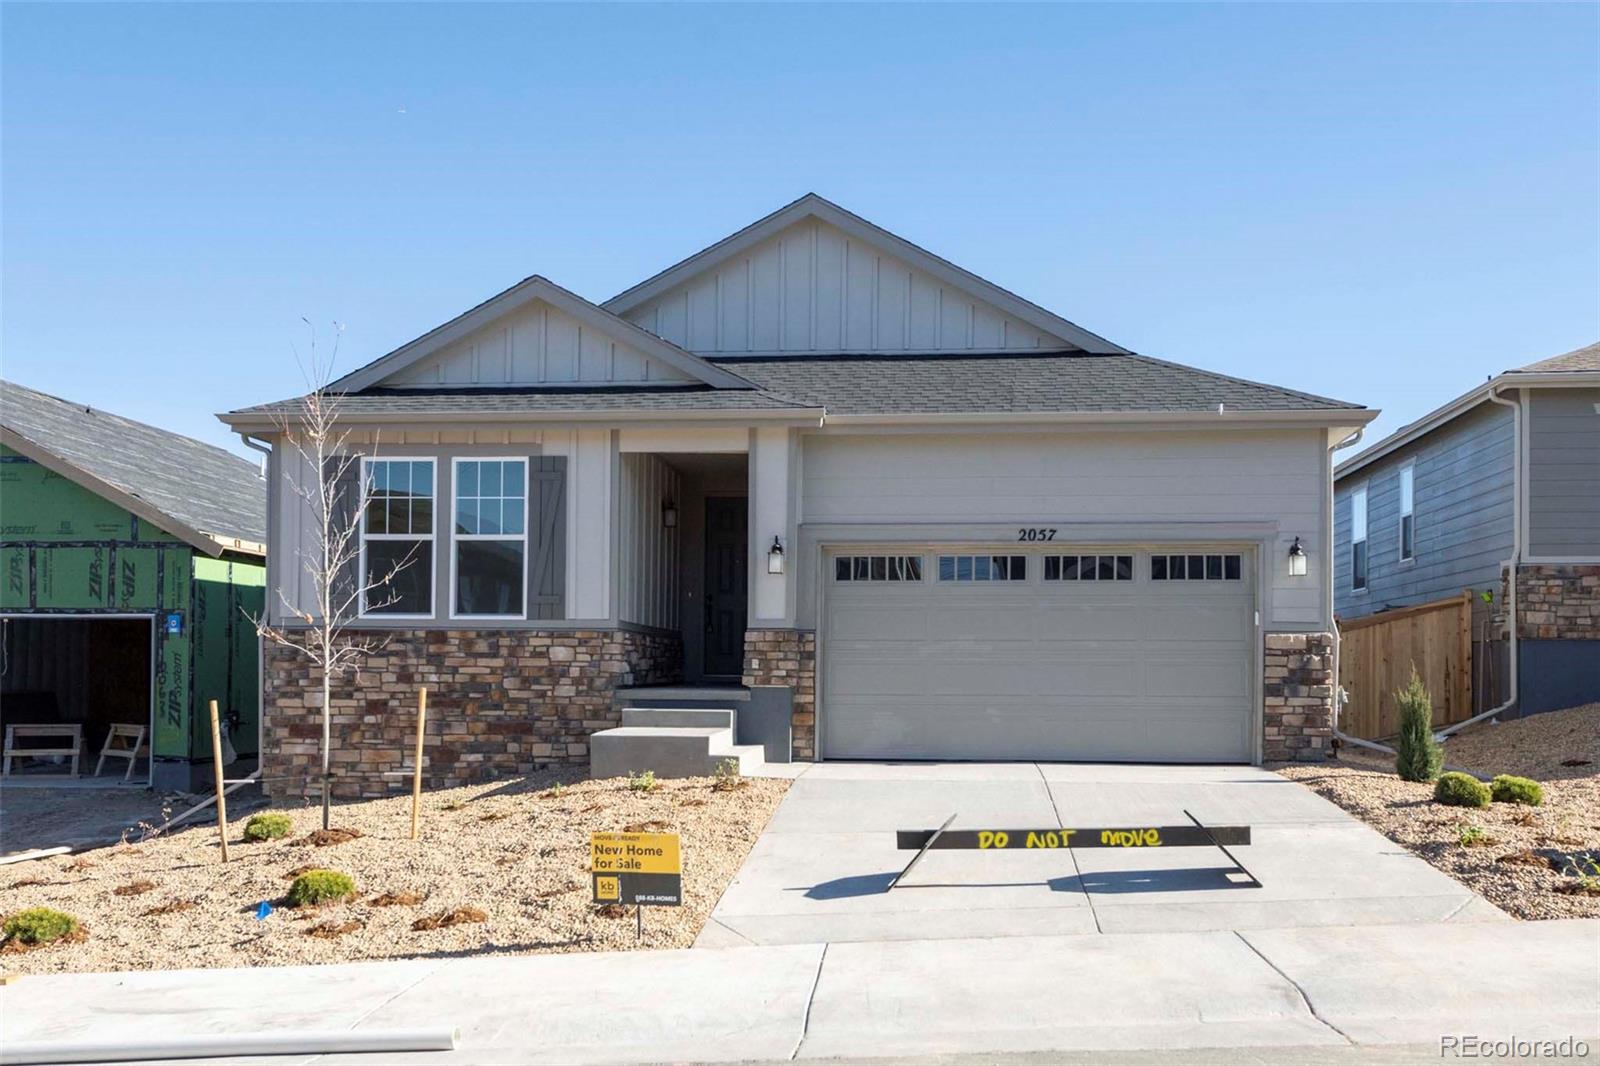 2057  peachleaf loop, Castle Rock sold home. Closed on 2024-03-28 for $715,000.